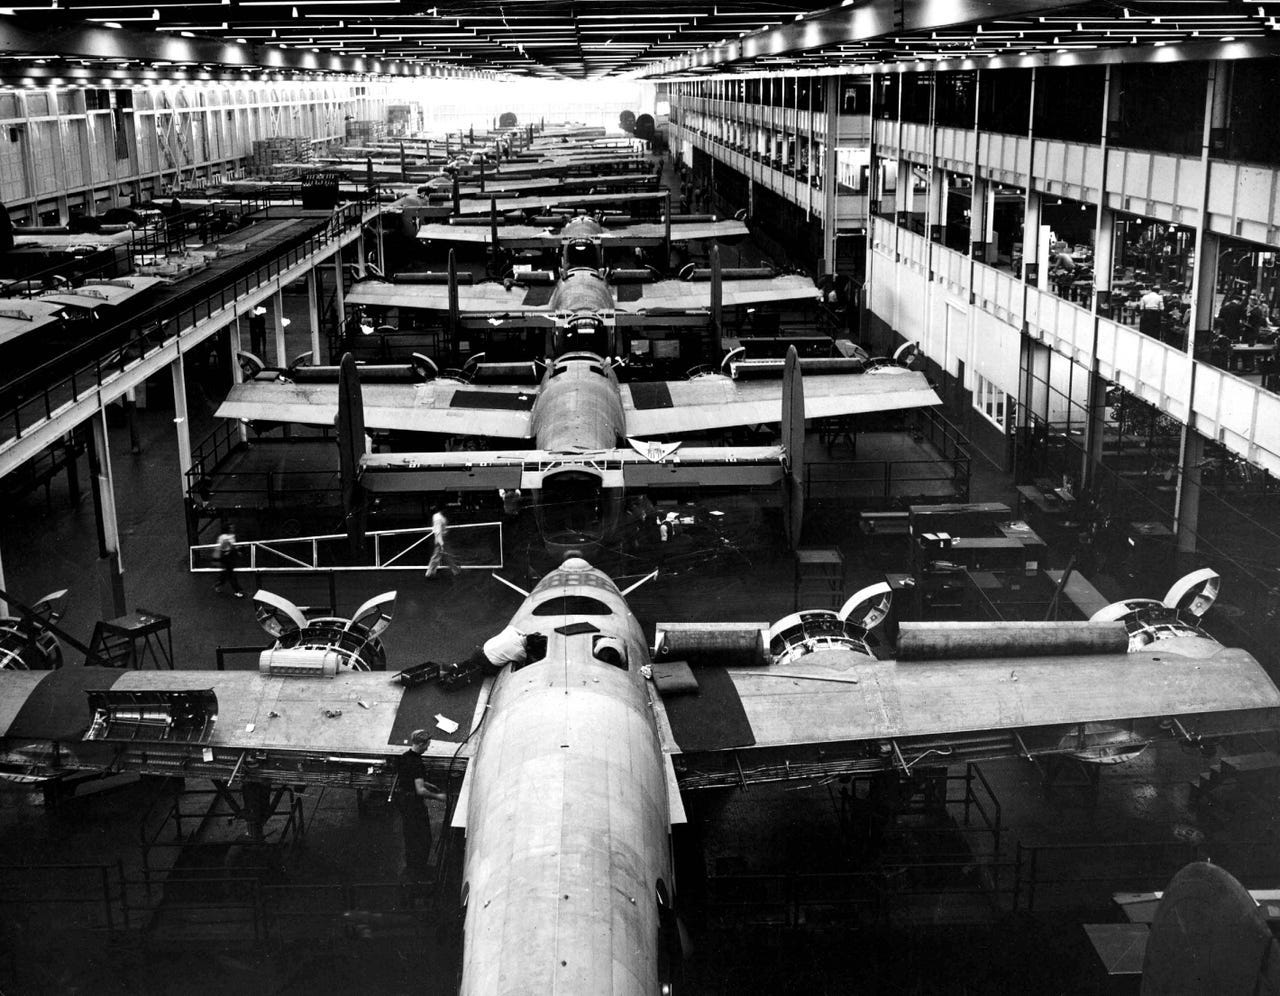 Interior fittings, plumbing and wiring were added to Liberator B24 bombers at a twin assembly line at the Ford Motor Company's Willow Run plant on Feb. 24, 1943. Detroit's role in the war, when the auto factories turned out tanks and warplanes, earned it a place in history as the Arsenal of Democracy.